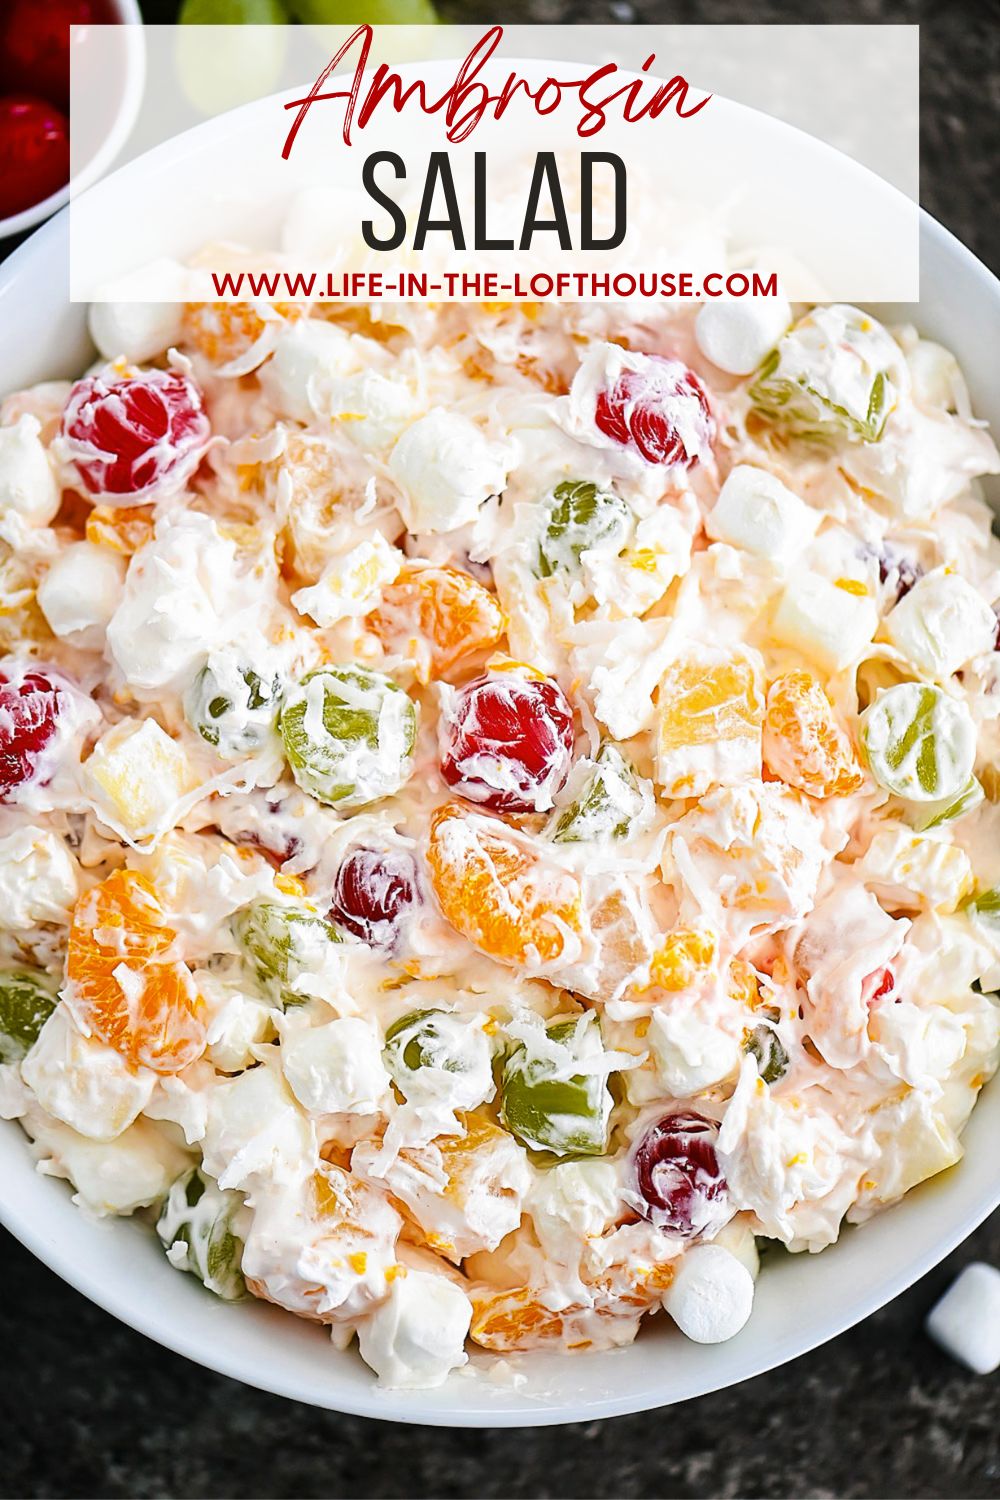 Ambrosia salad has apples, oranges, pineapples and grapes all tossed together in whipped topping and shredded coconut. Life-in-the-Lofthouse.com